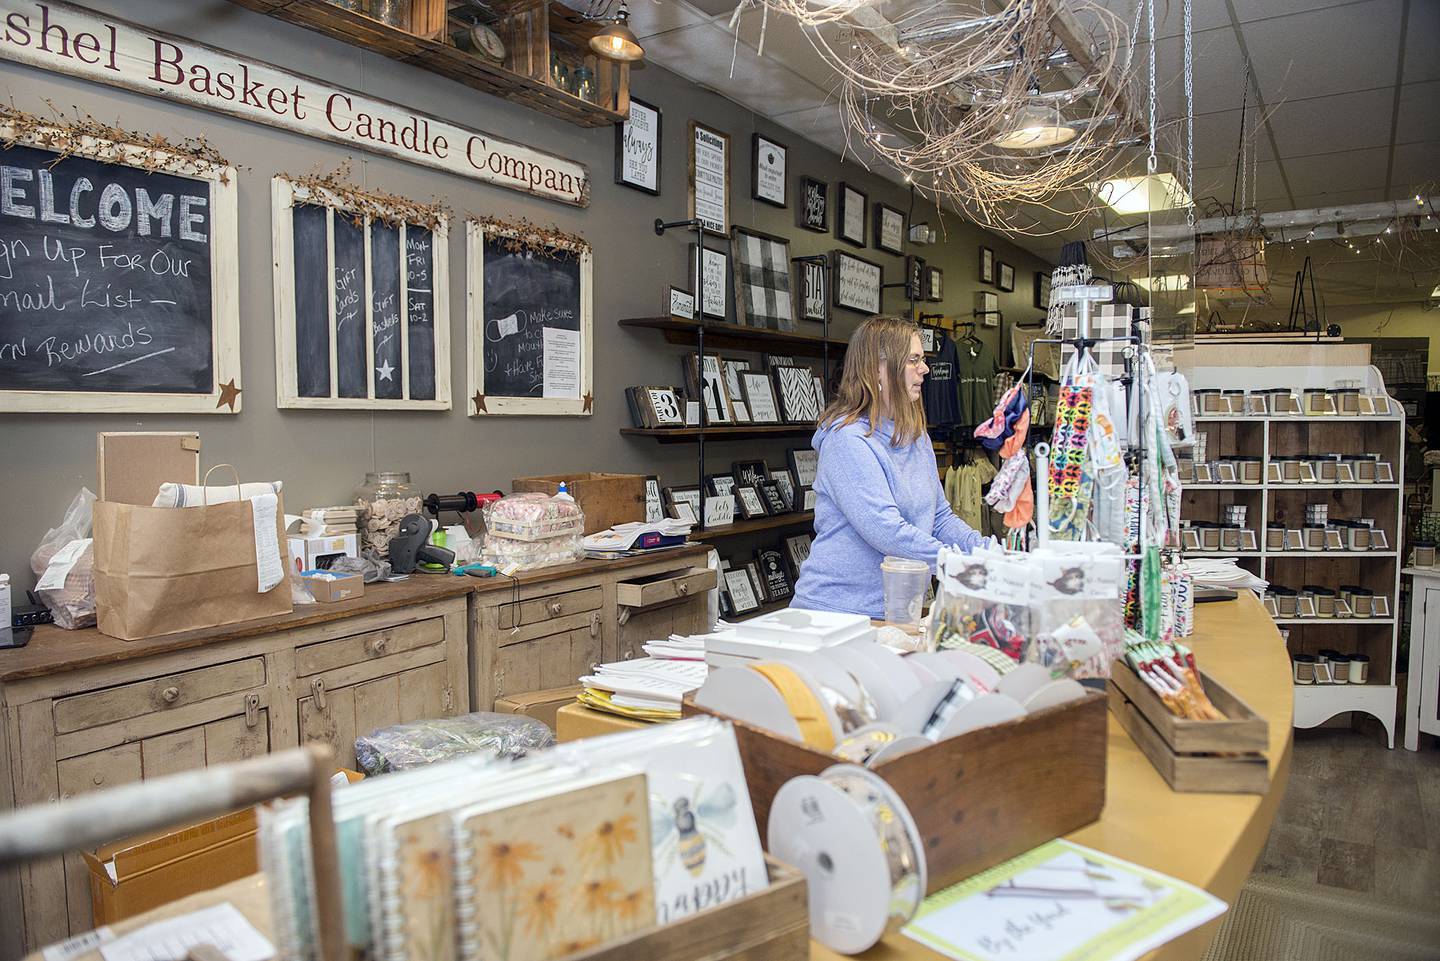 Jackie Payne, owner of Bushel Basket Candle Company, works at her counter Thursday, Feb. 17, 2022. The store has been a stalwart at the mall and will remain unchanged, but Payne and family will be opening a separate toy store.